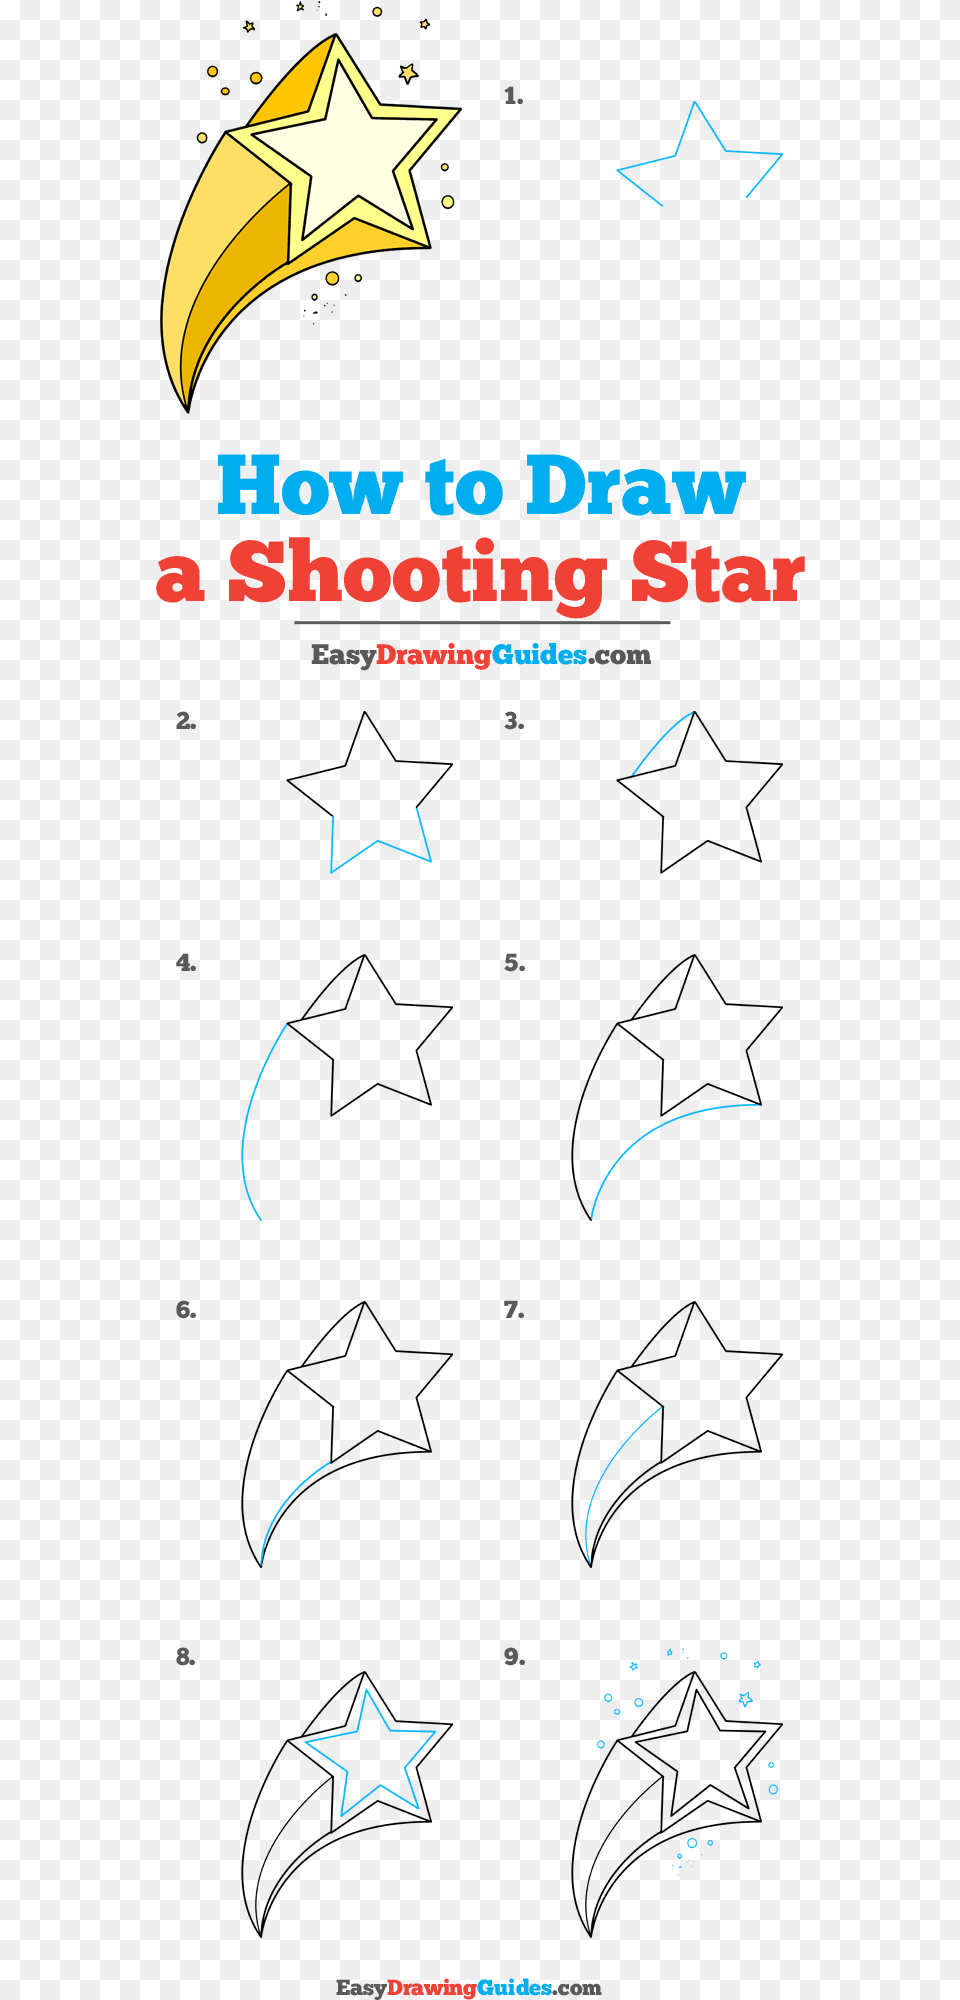 How To Draw Shooting Star Shooting Star Drawing Easy, Symbol Png